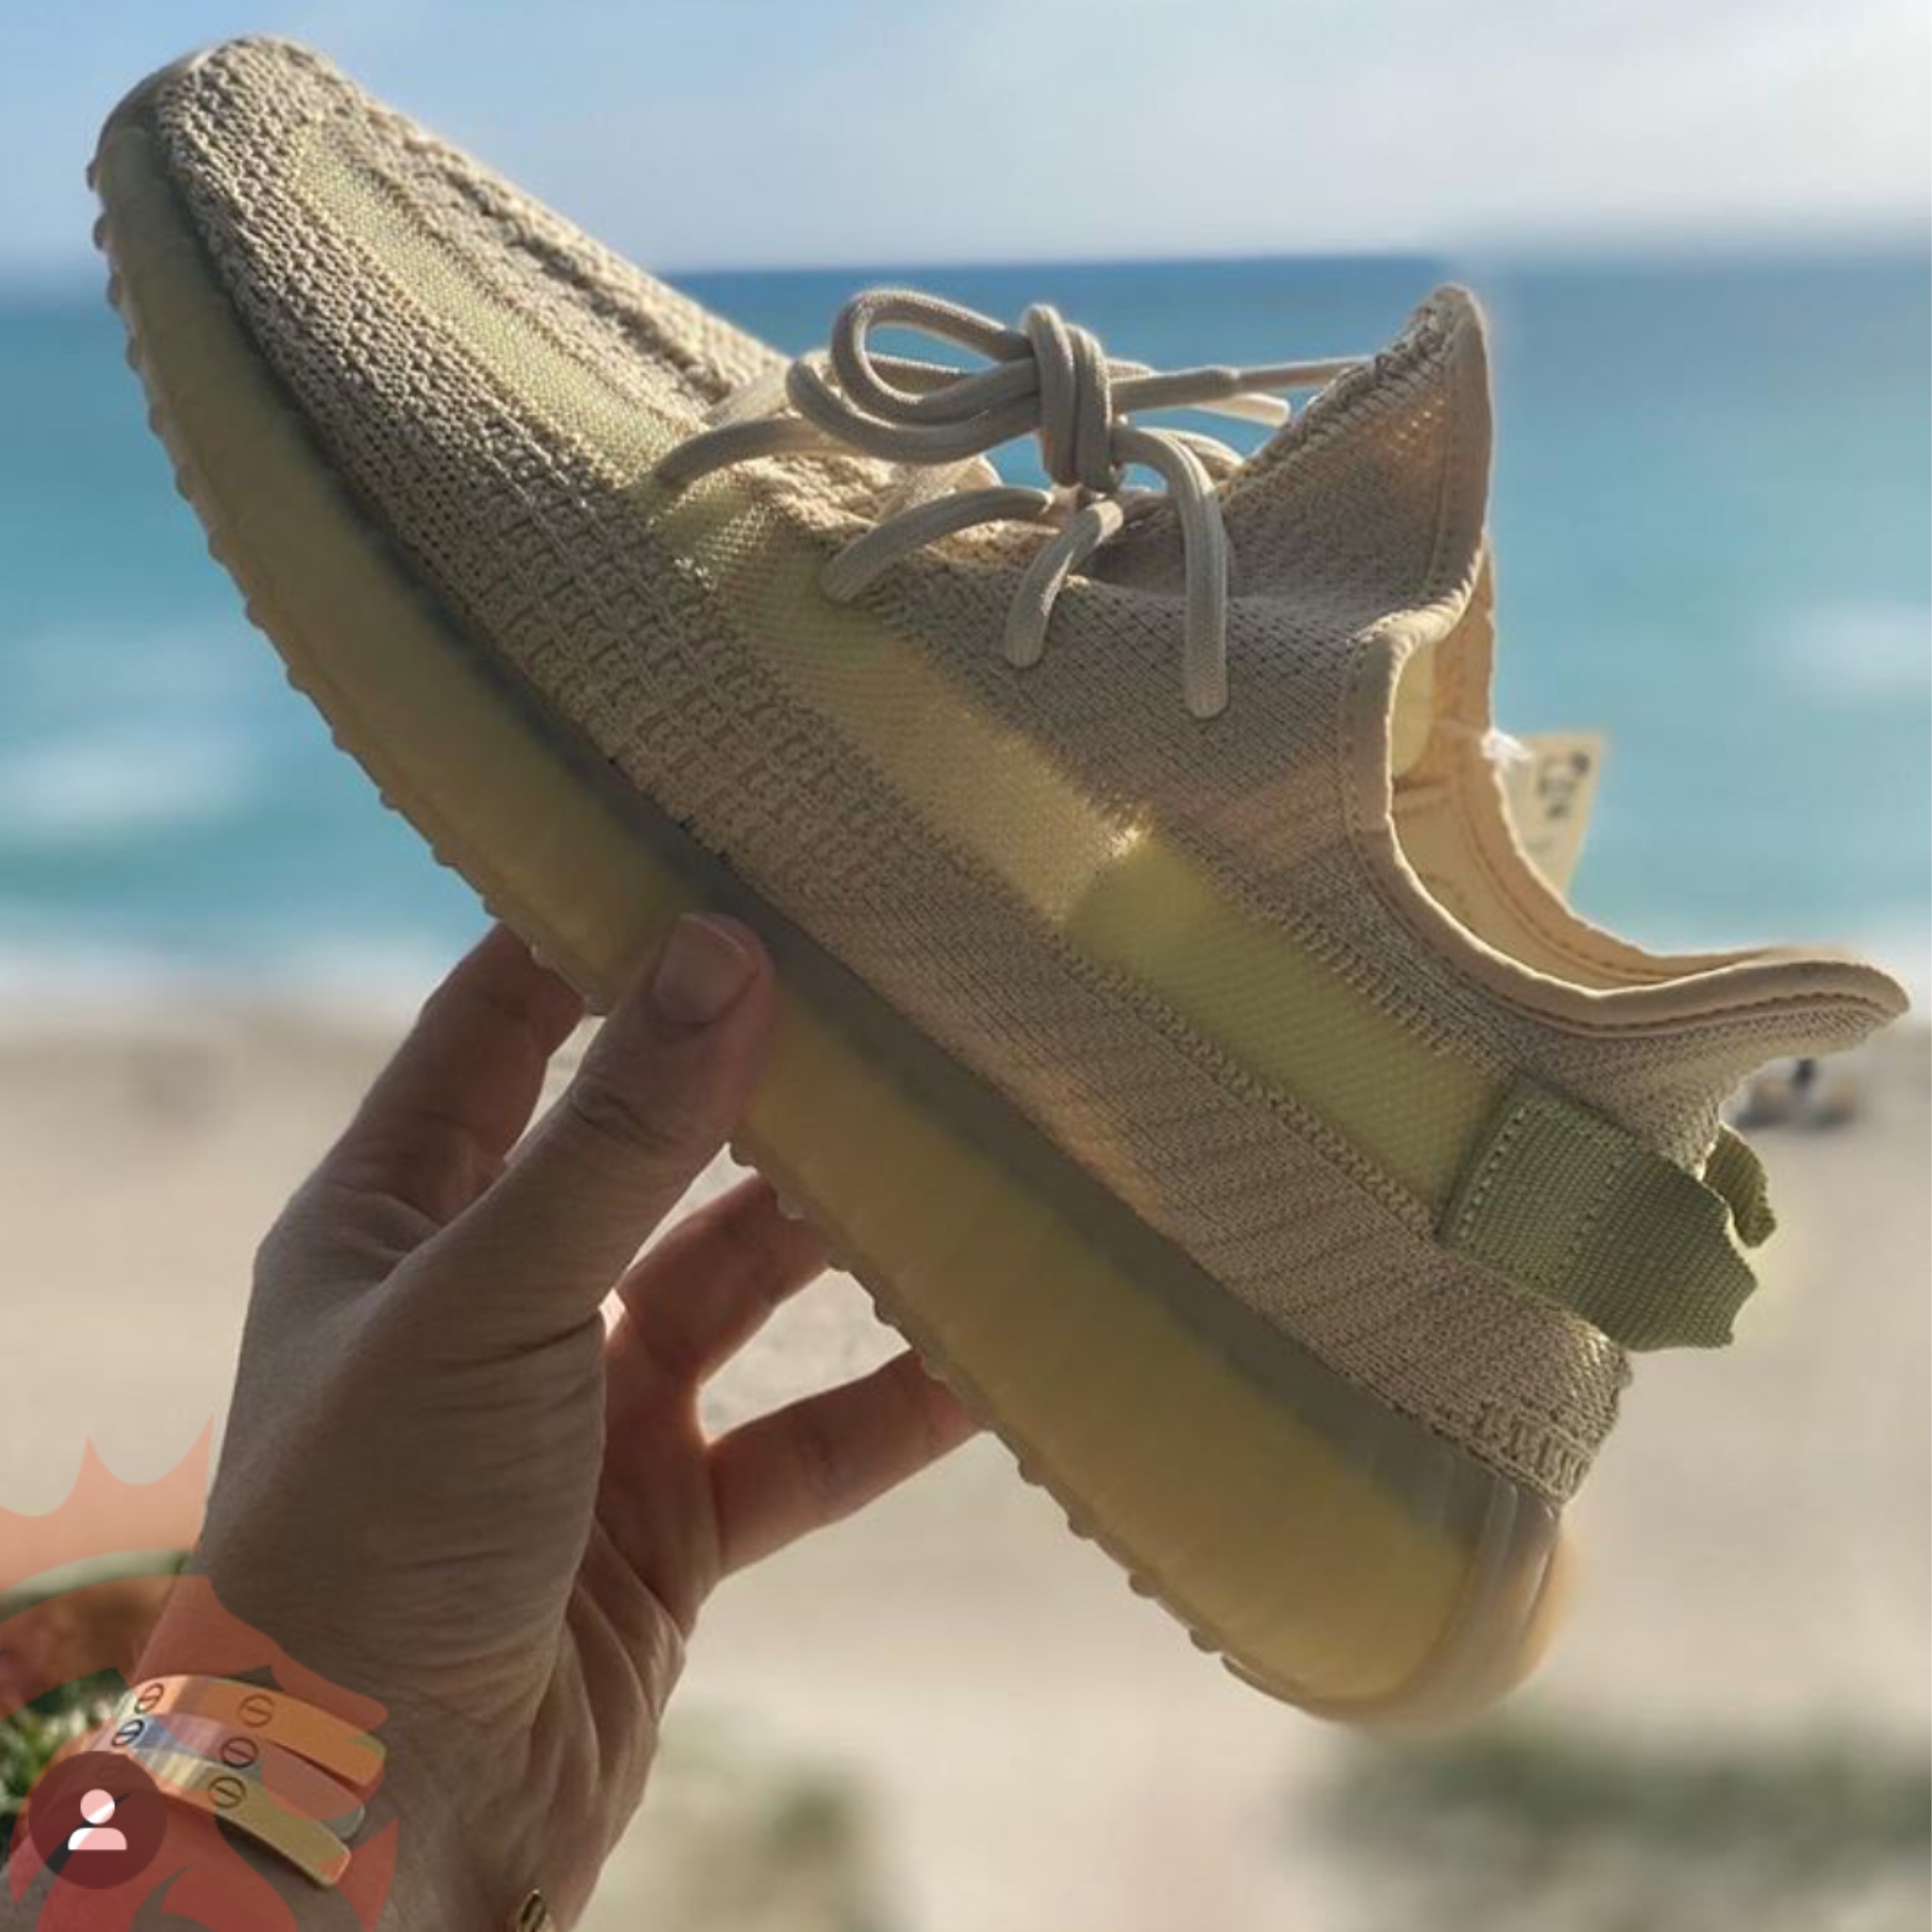 yeezy 350 v2 flax release date